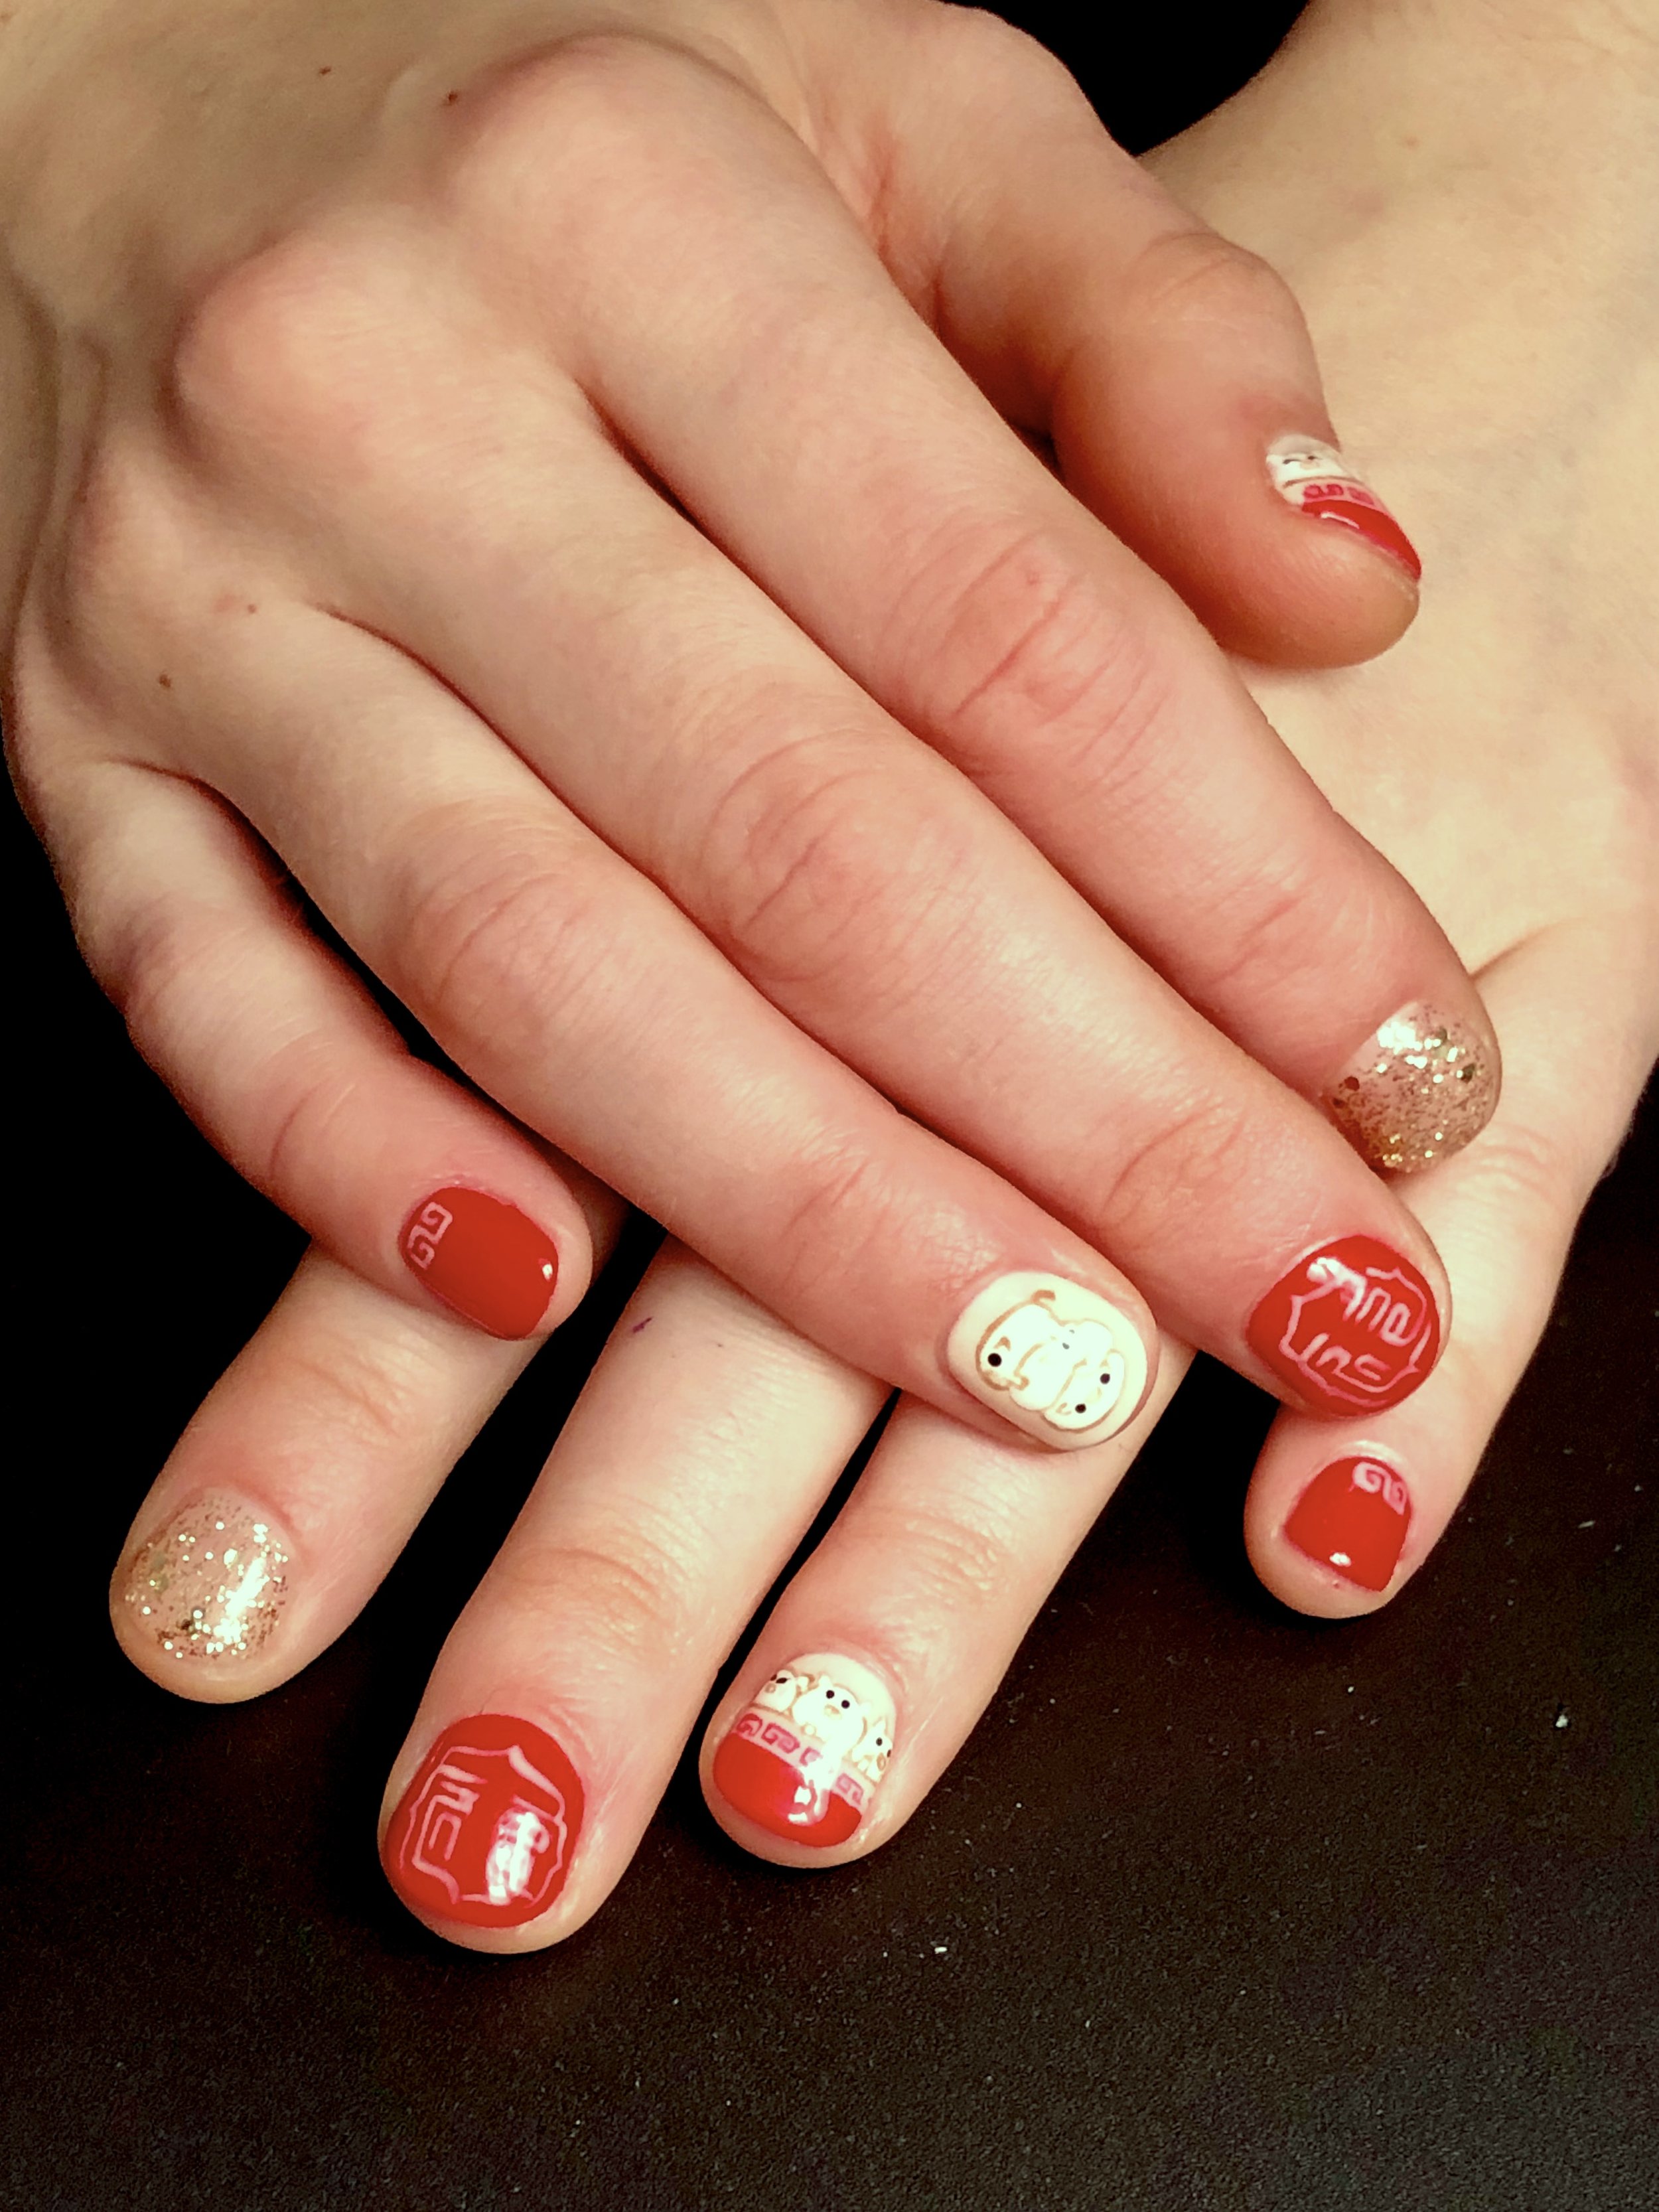 Allee's Nail Art 2